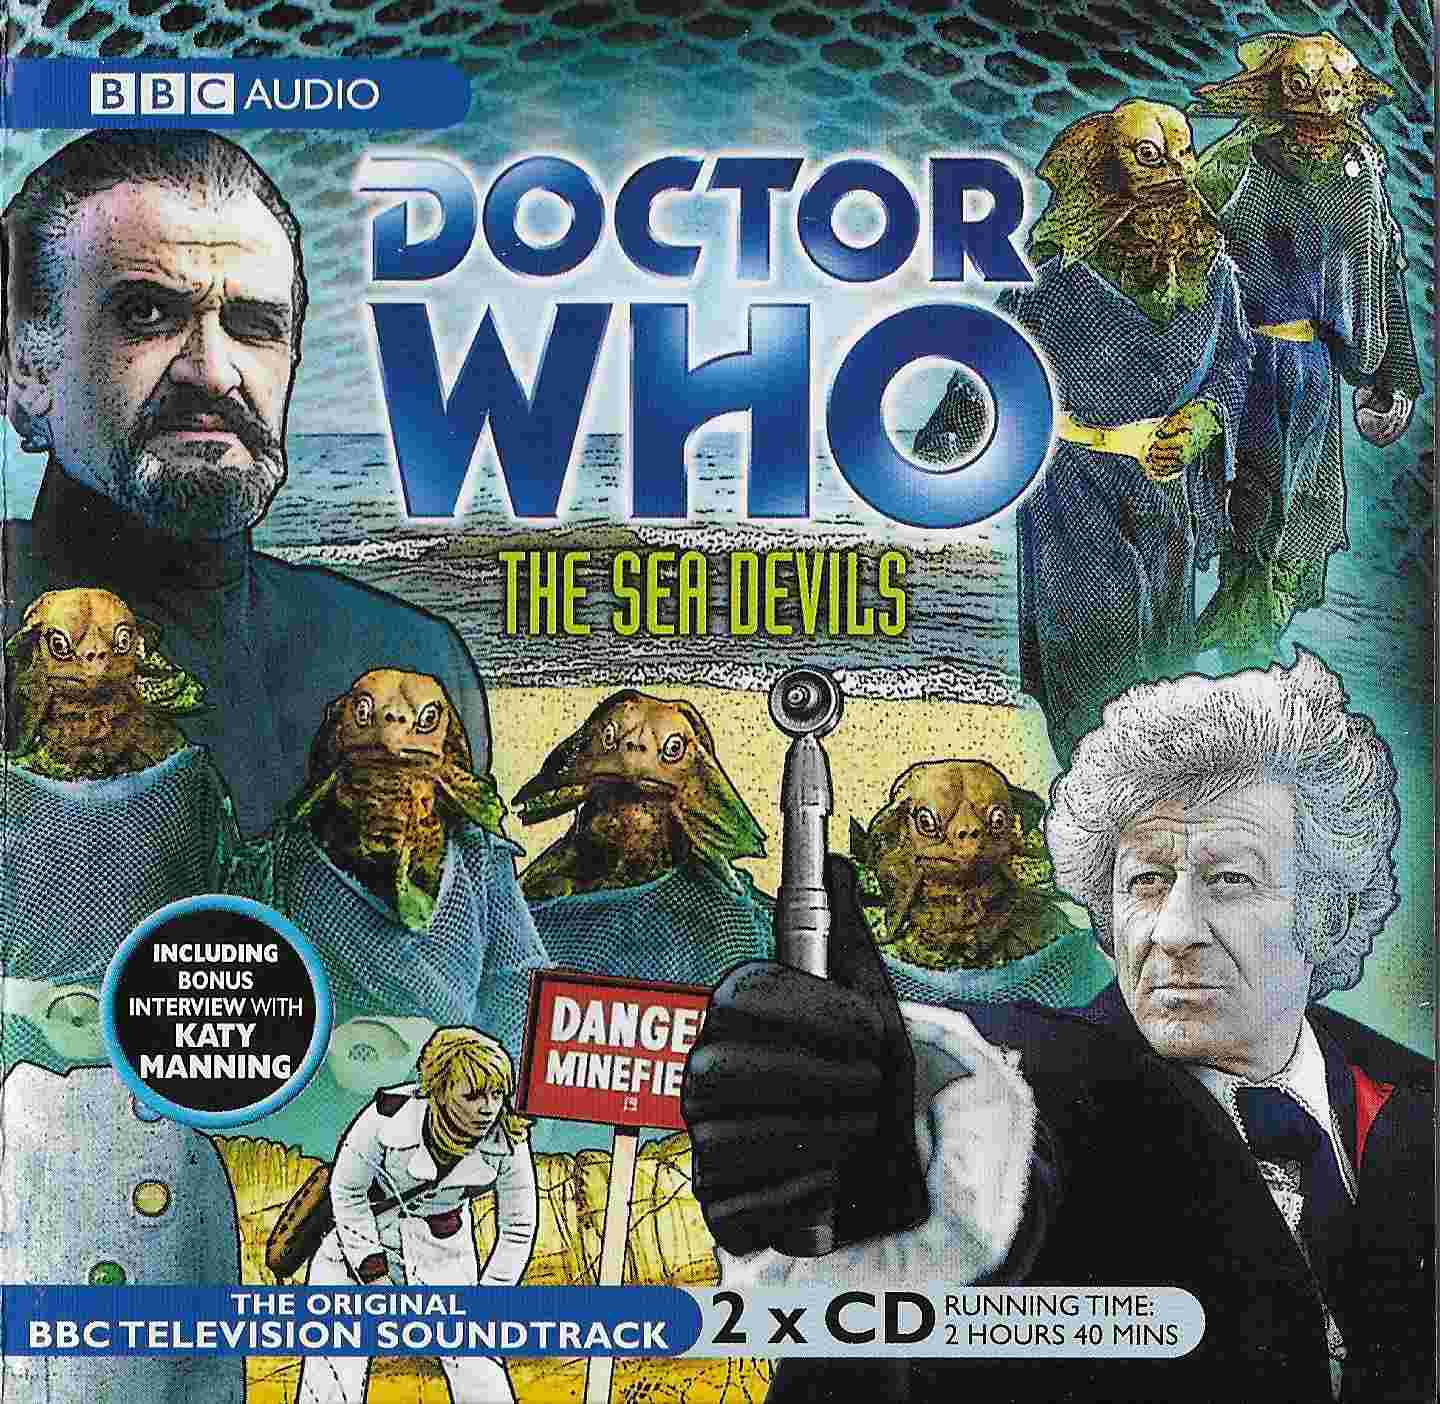 Picture of ISBN 1-4056-7737-6 Doctor Who - The sea devils by artist Malcolm Hulke from the BBC cds - Records and Tapes library